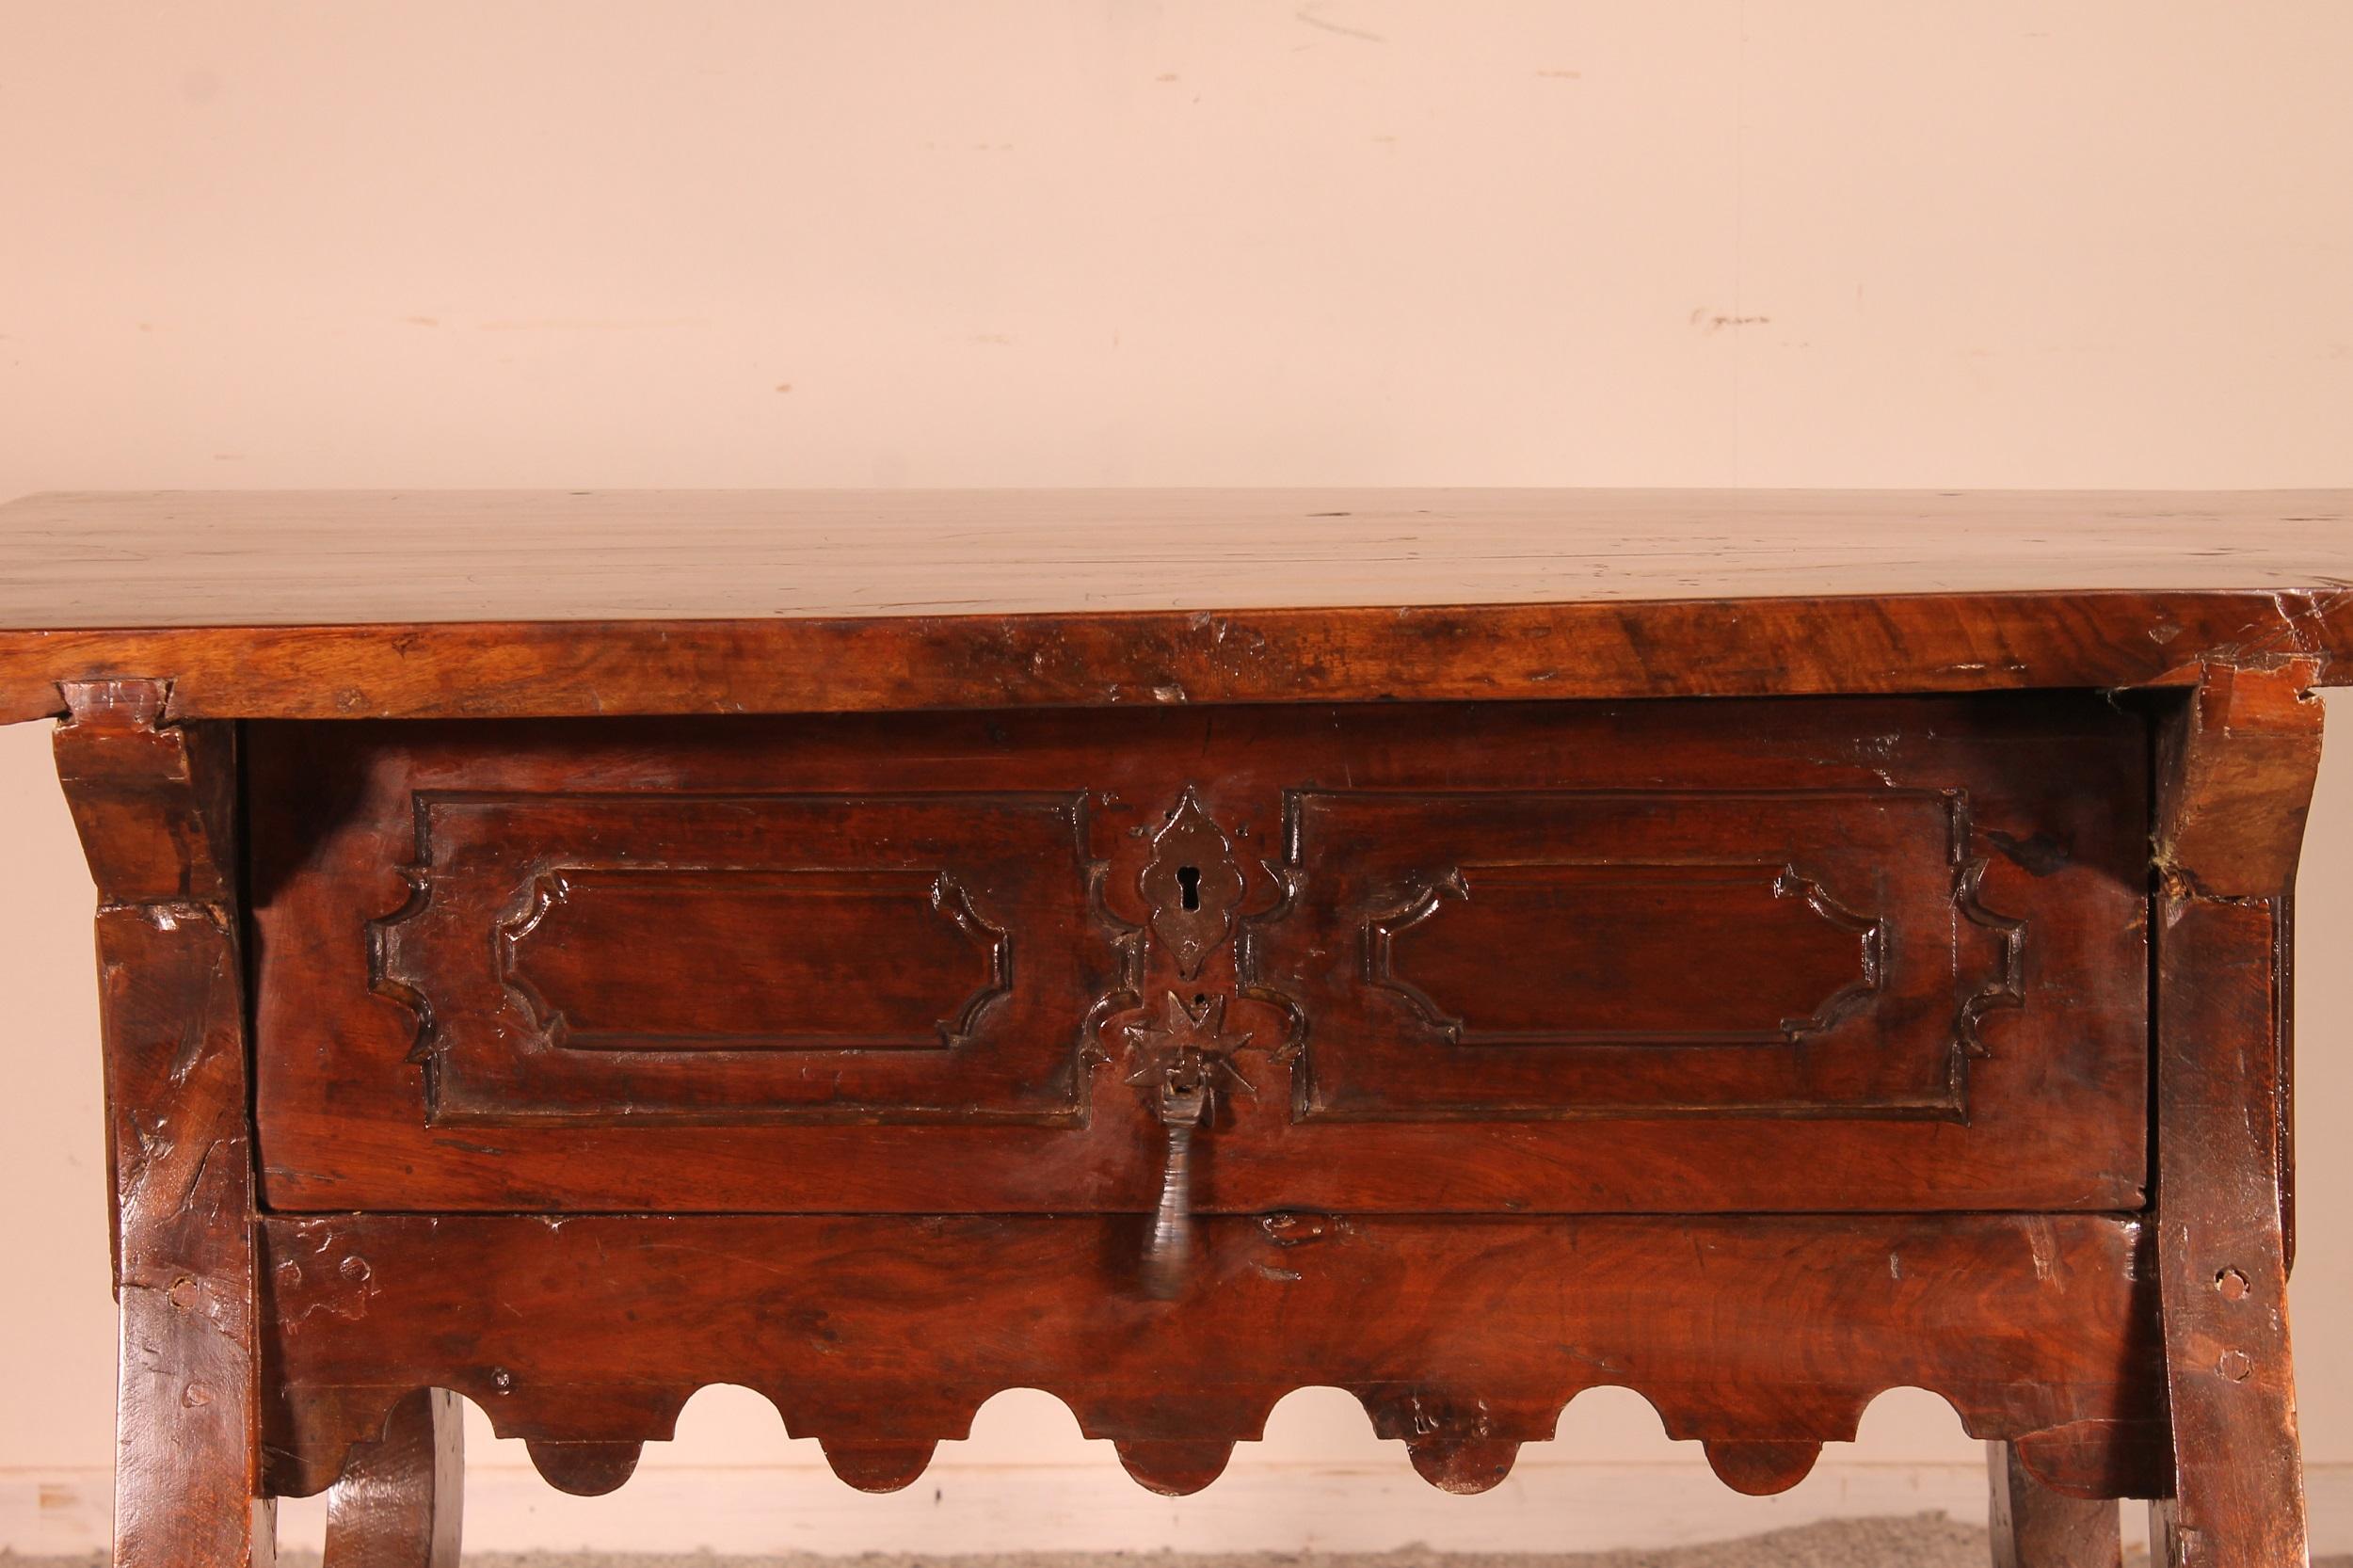 superb table or consolde in walnut of the Spanish renaissance with a drawer in its center of the 17th century

Original irons and lock
very nice work on the drawer

Superb patina and in very good condition
restoration of use
to note: a piece